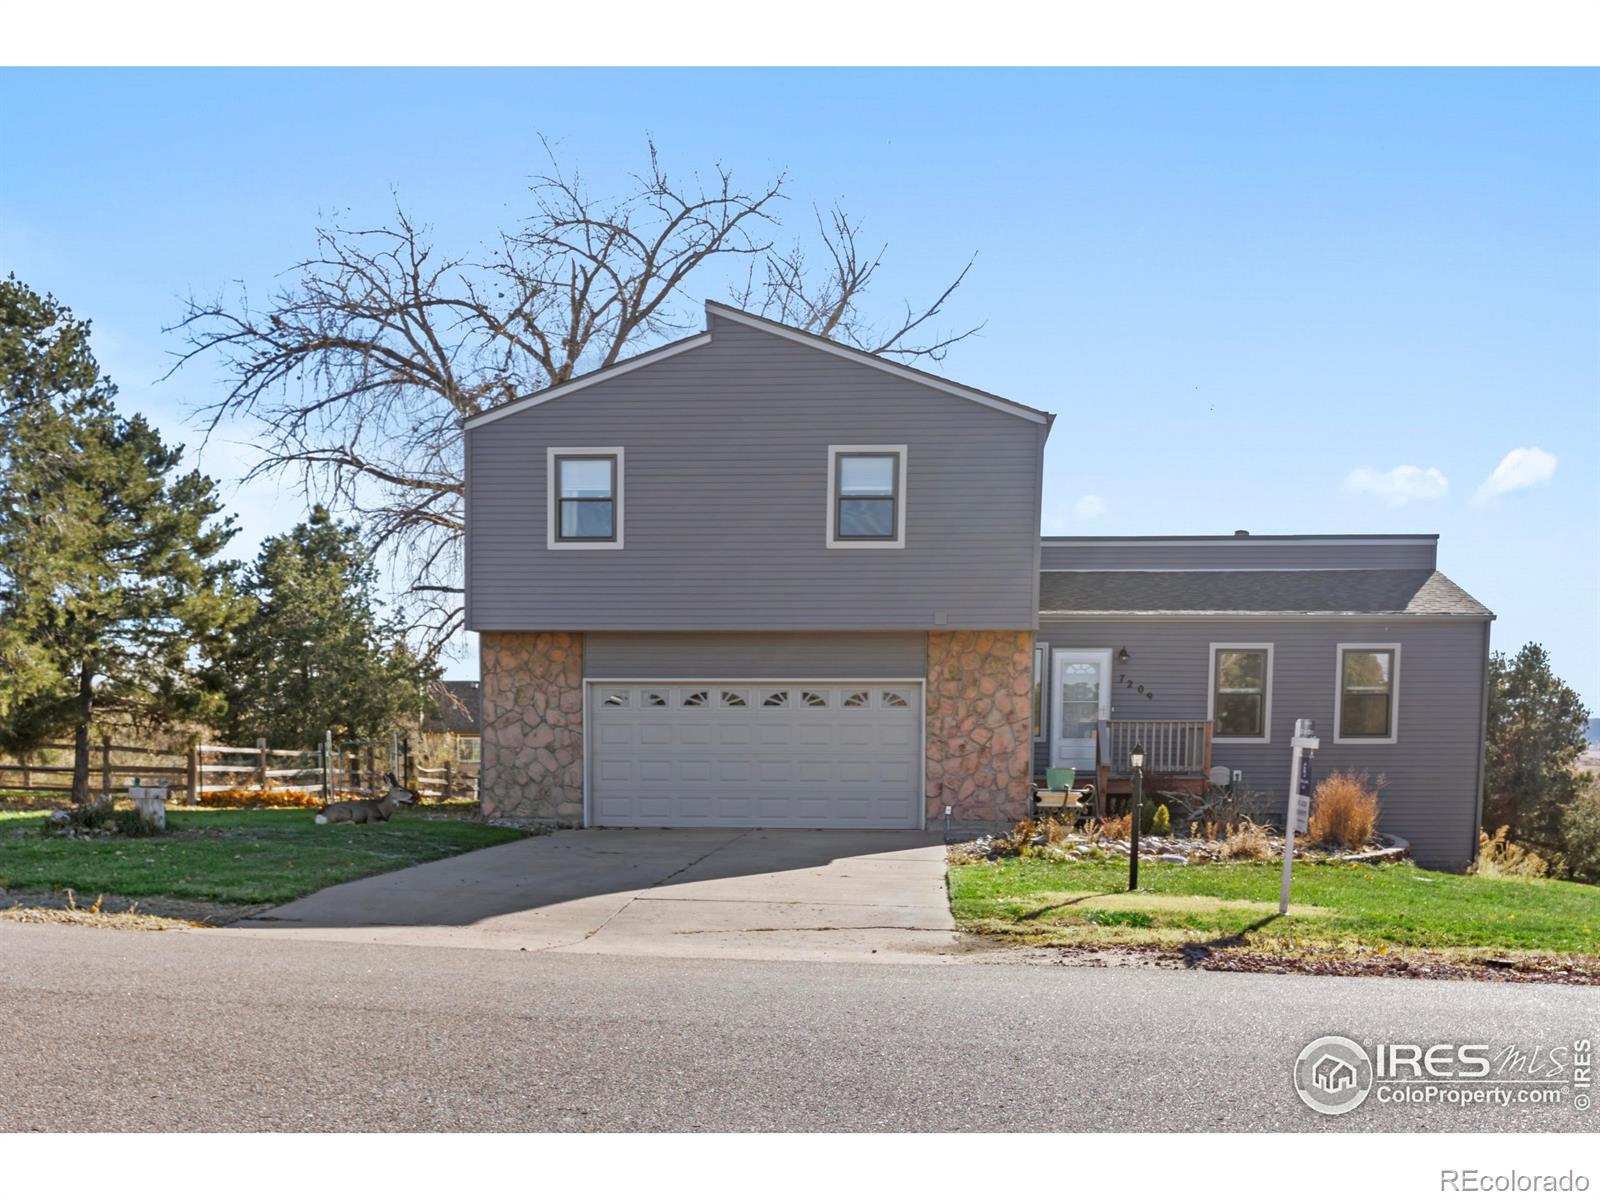 7209 N Hyperion Way, parker MLS: 456789999488 Beds: 3 Baths: 3 Price: $579,900